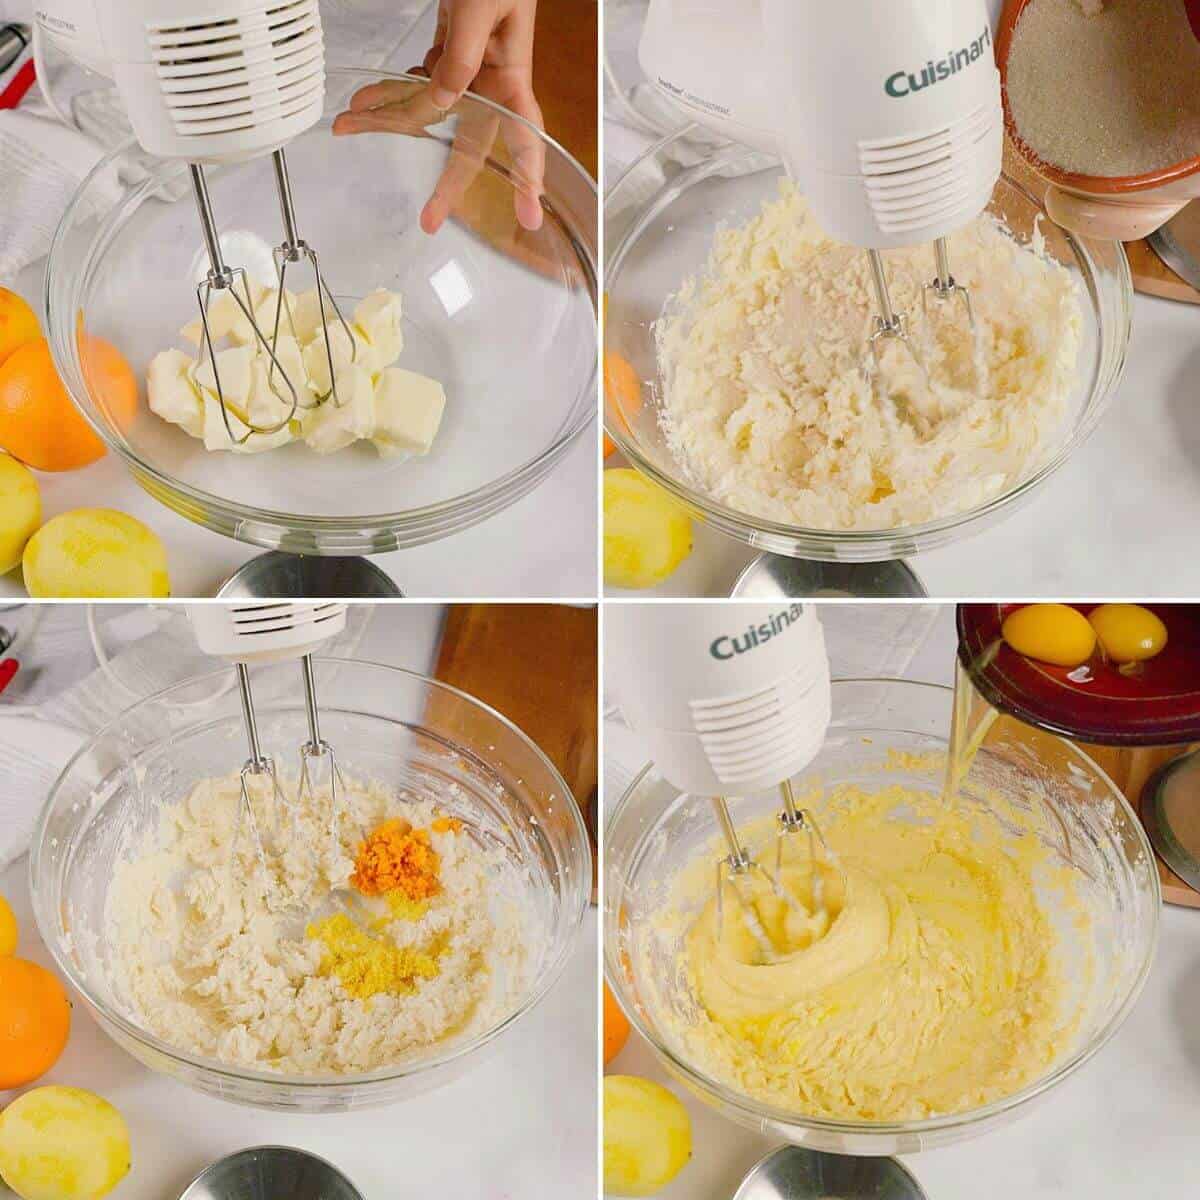 Beating the butter with sugar, zest and eggs.